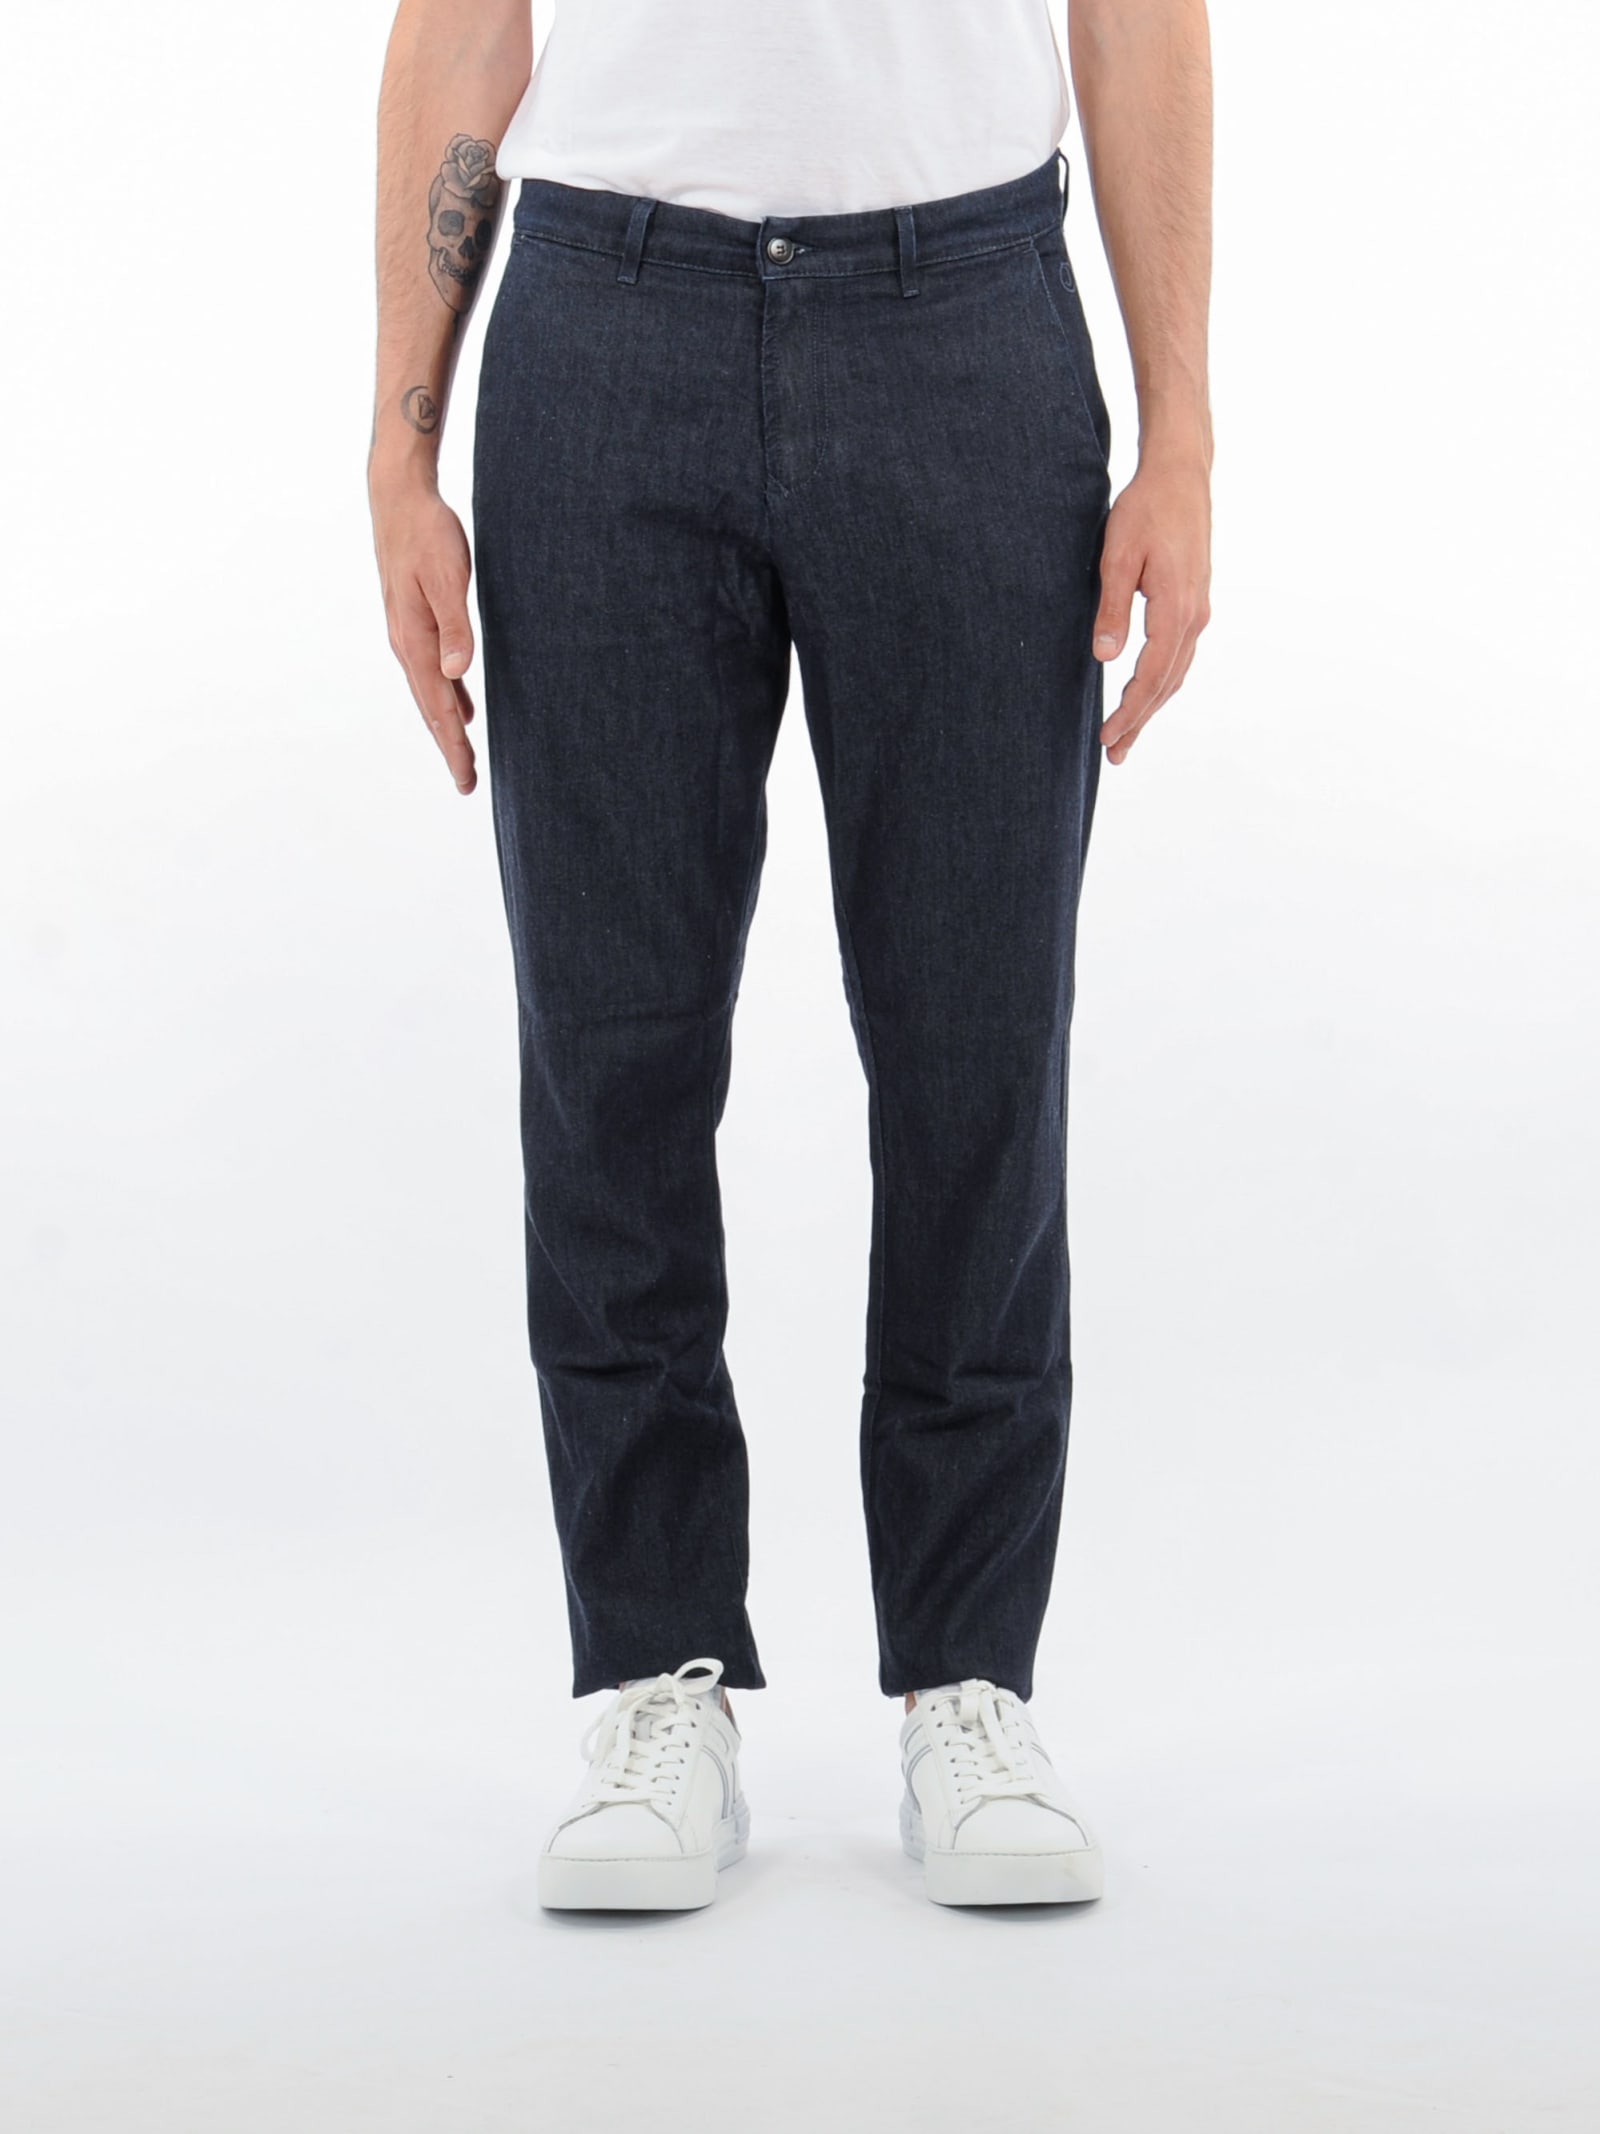 Jeckerson Pantal. Uomo Cover Twill Trousers